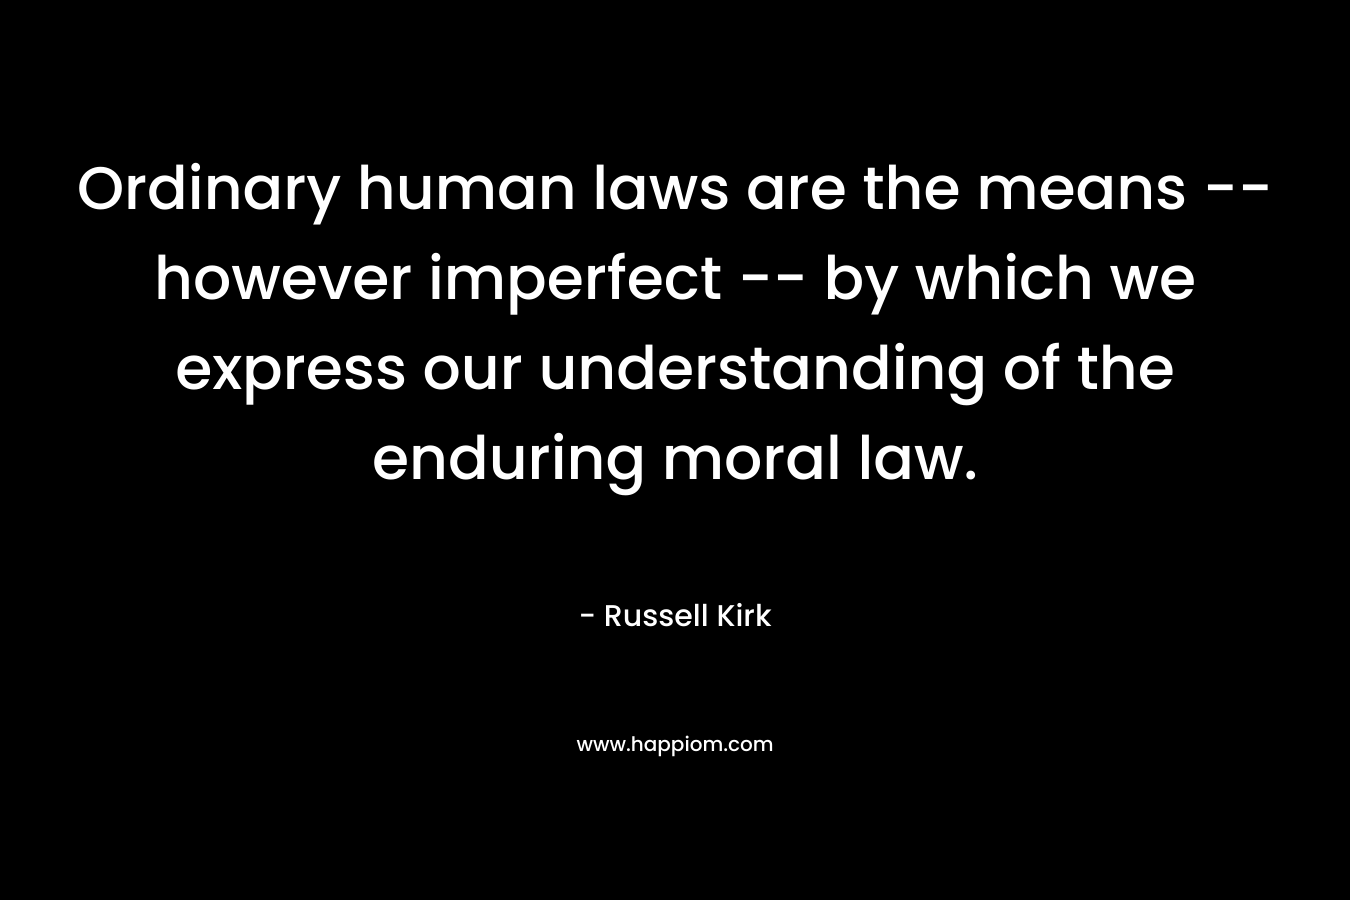 Ordinary human laws are the means -- however imperfect -- by which we express our understanding of the enduring moral law.